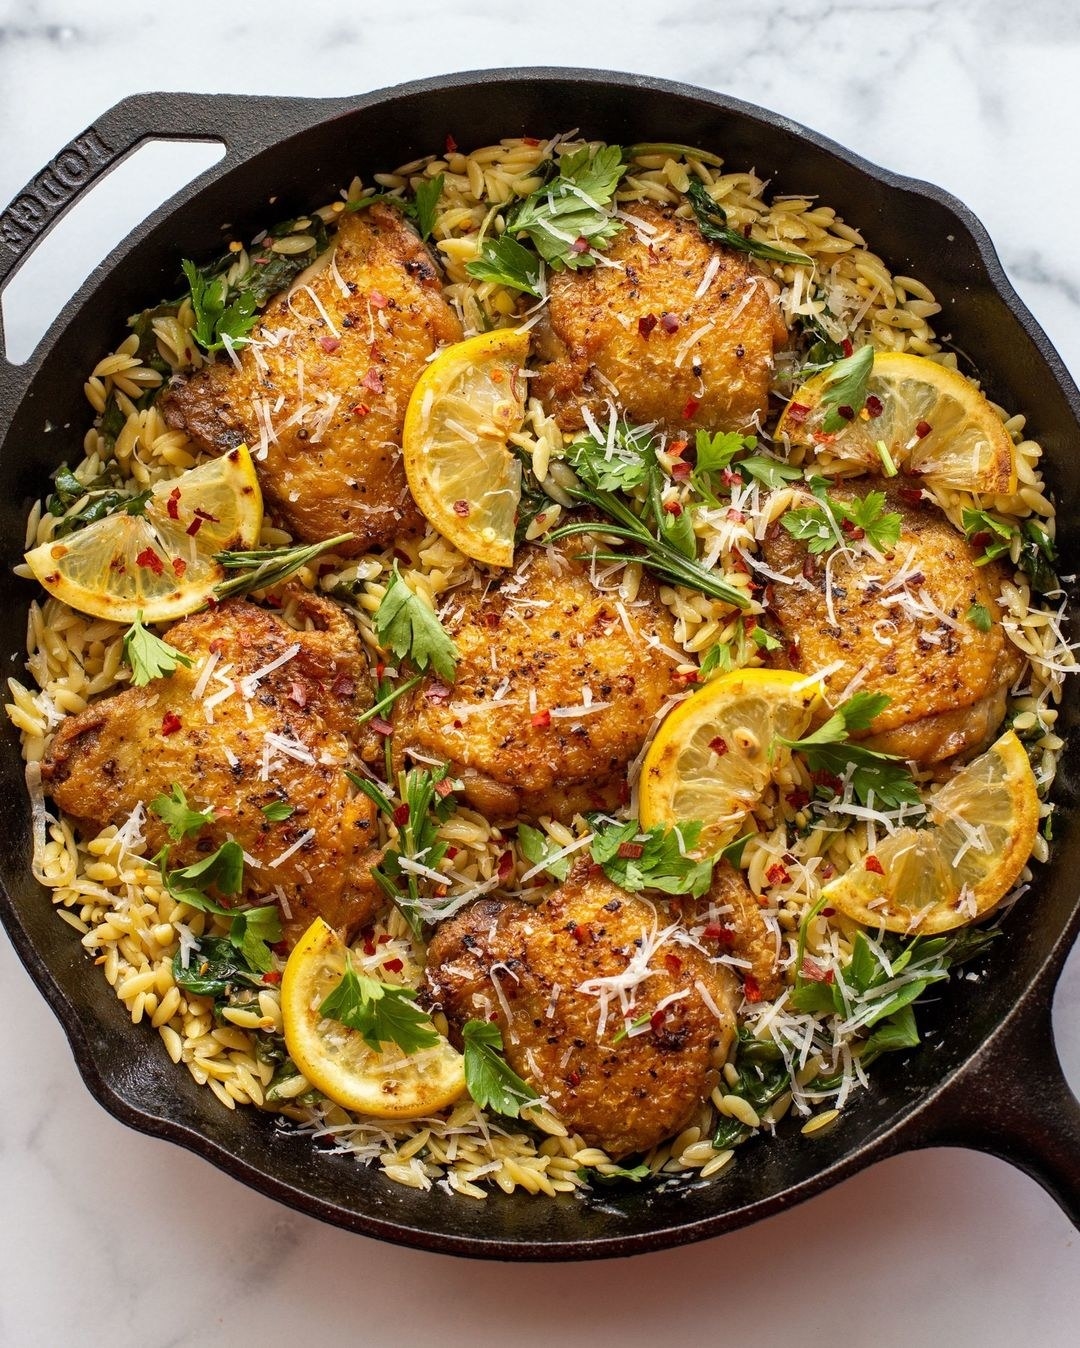 The cast iron skillet